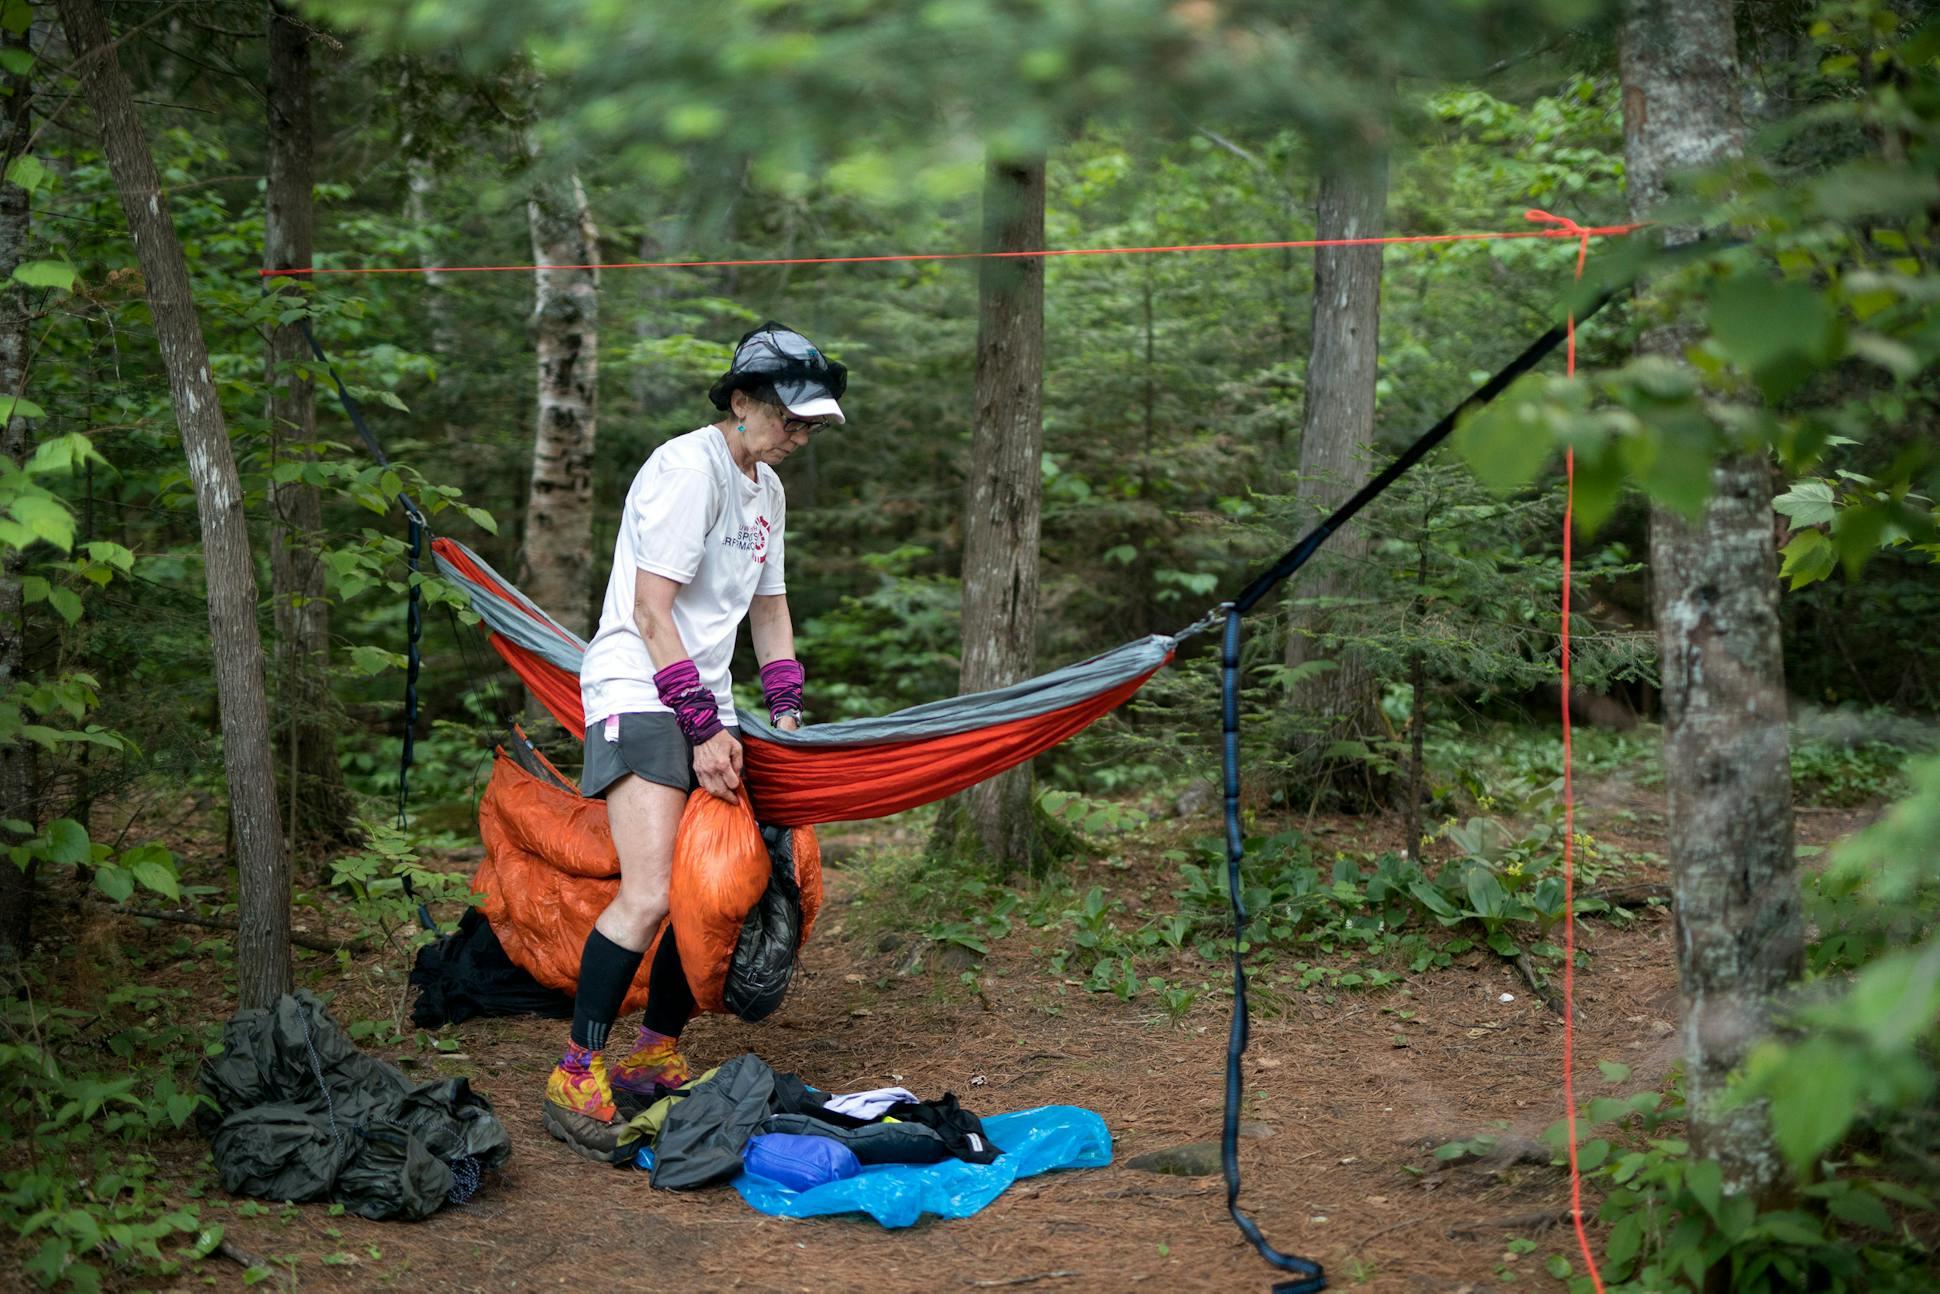 After arriving in camp at about 8:30p.m. with a long 20 mile day behind her, Melanie McManus, exhausted and dehydrated, sets up her camp near the Manitou River.